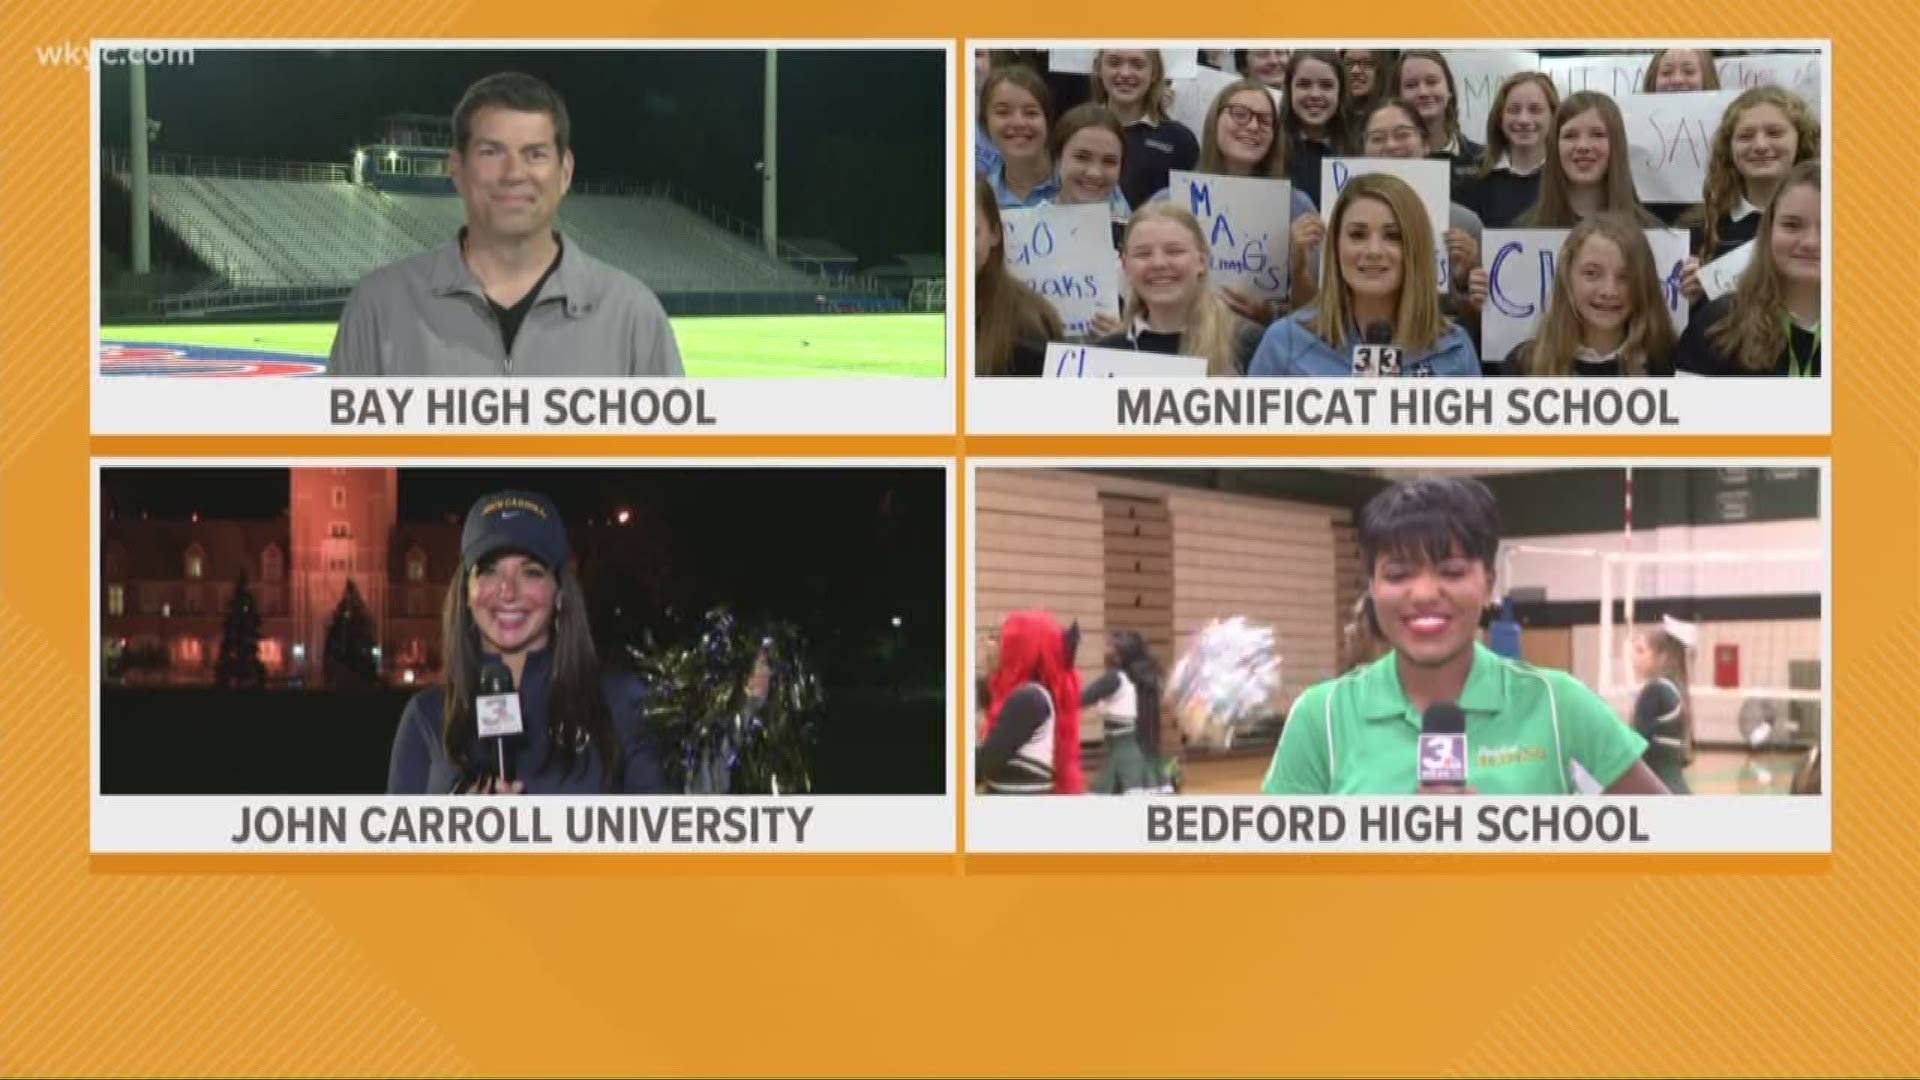 Aug. 23, 2019: We've been talking about kids going back to school all week, so we thought it would be fun to have our morning crew of Maureen Kyle, Dave Chudowsky, Hollie Strano and Danielle Wiggins return to the schools they once attended.